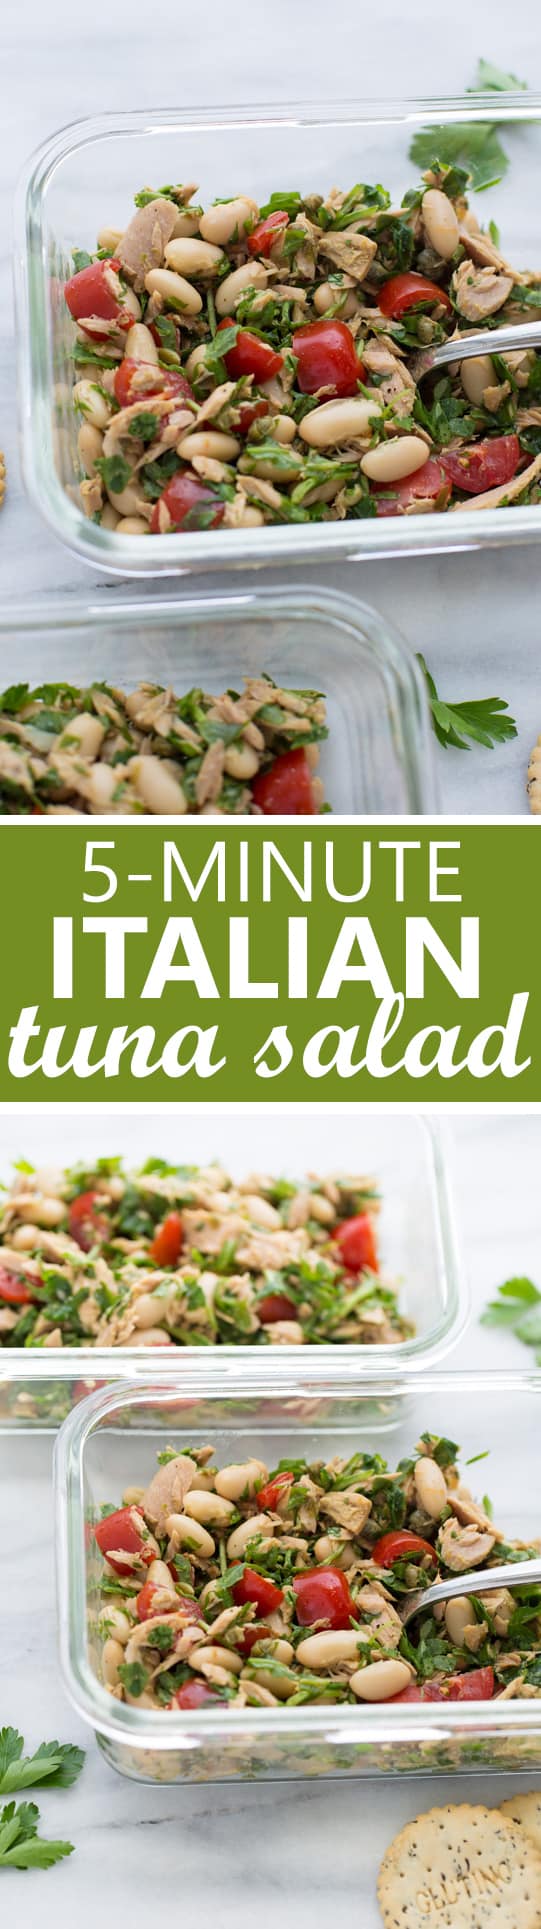 5-Minute Italian Tuna Salad! An easy, healthy, protein-packed lunch you can make in minutes!